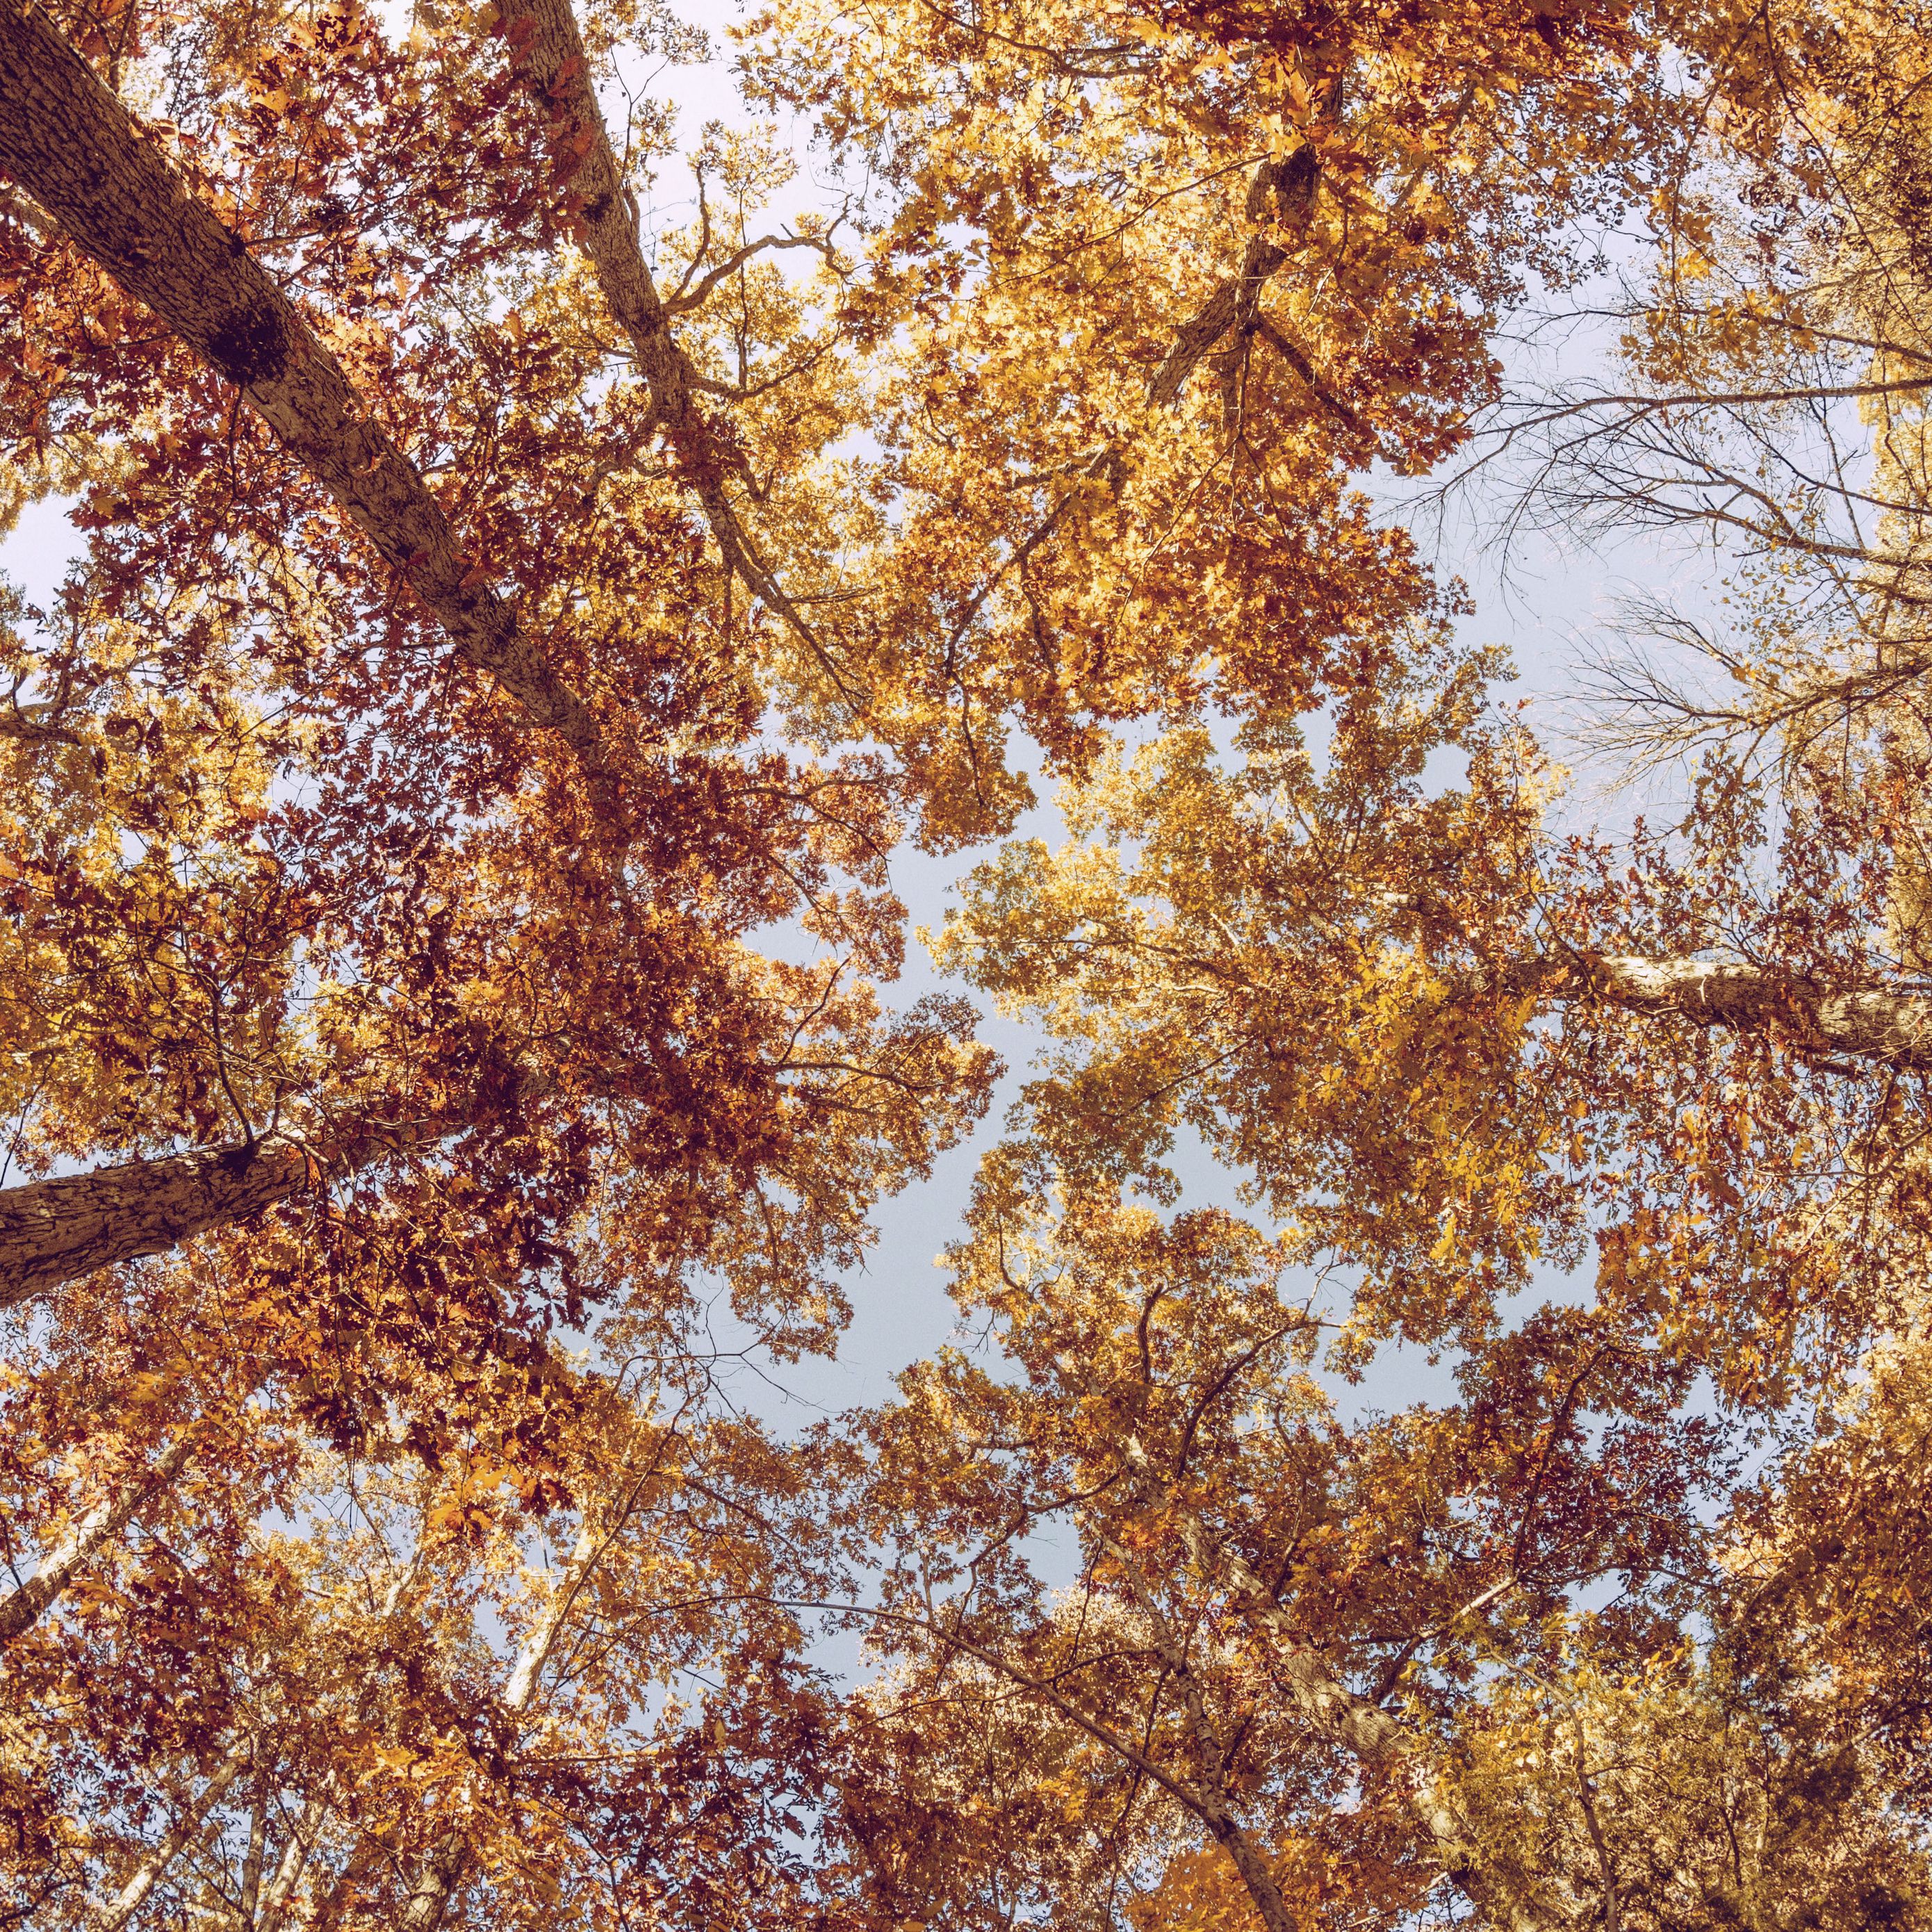 Download wallpaper 2780x2780 trees, view from below, autumn ipad air, ipad air ipad ipad ipad mini ipad mini ipad mini ipad pro 9.7 for parallax HD background